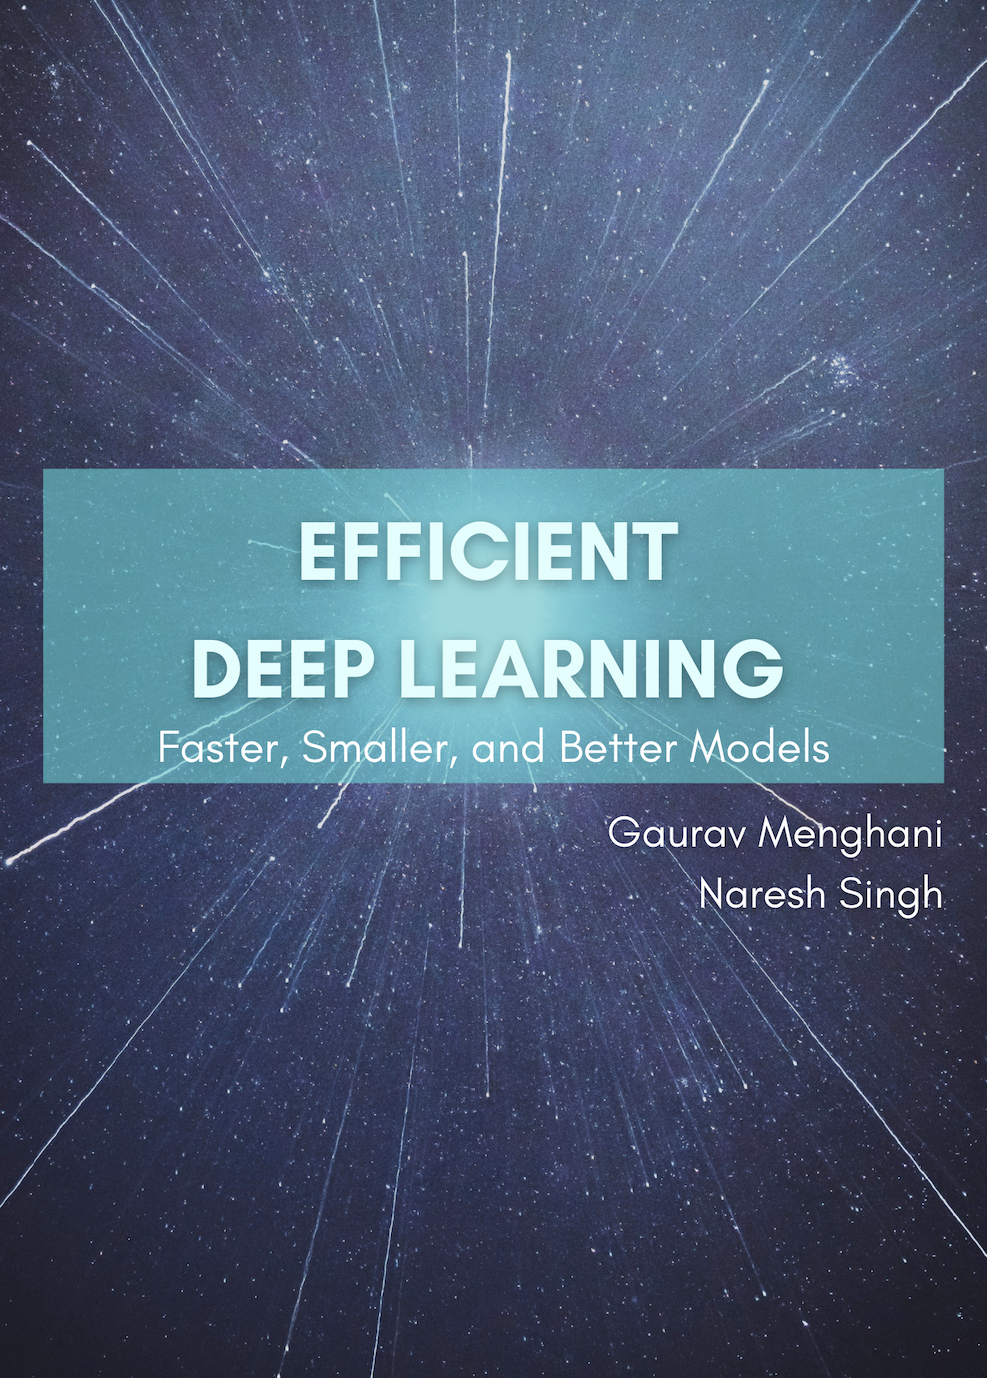 Efficient Deep Learning book cover